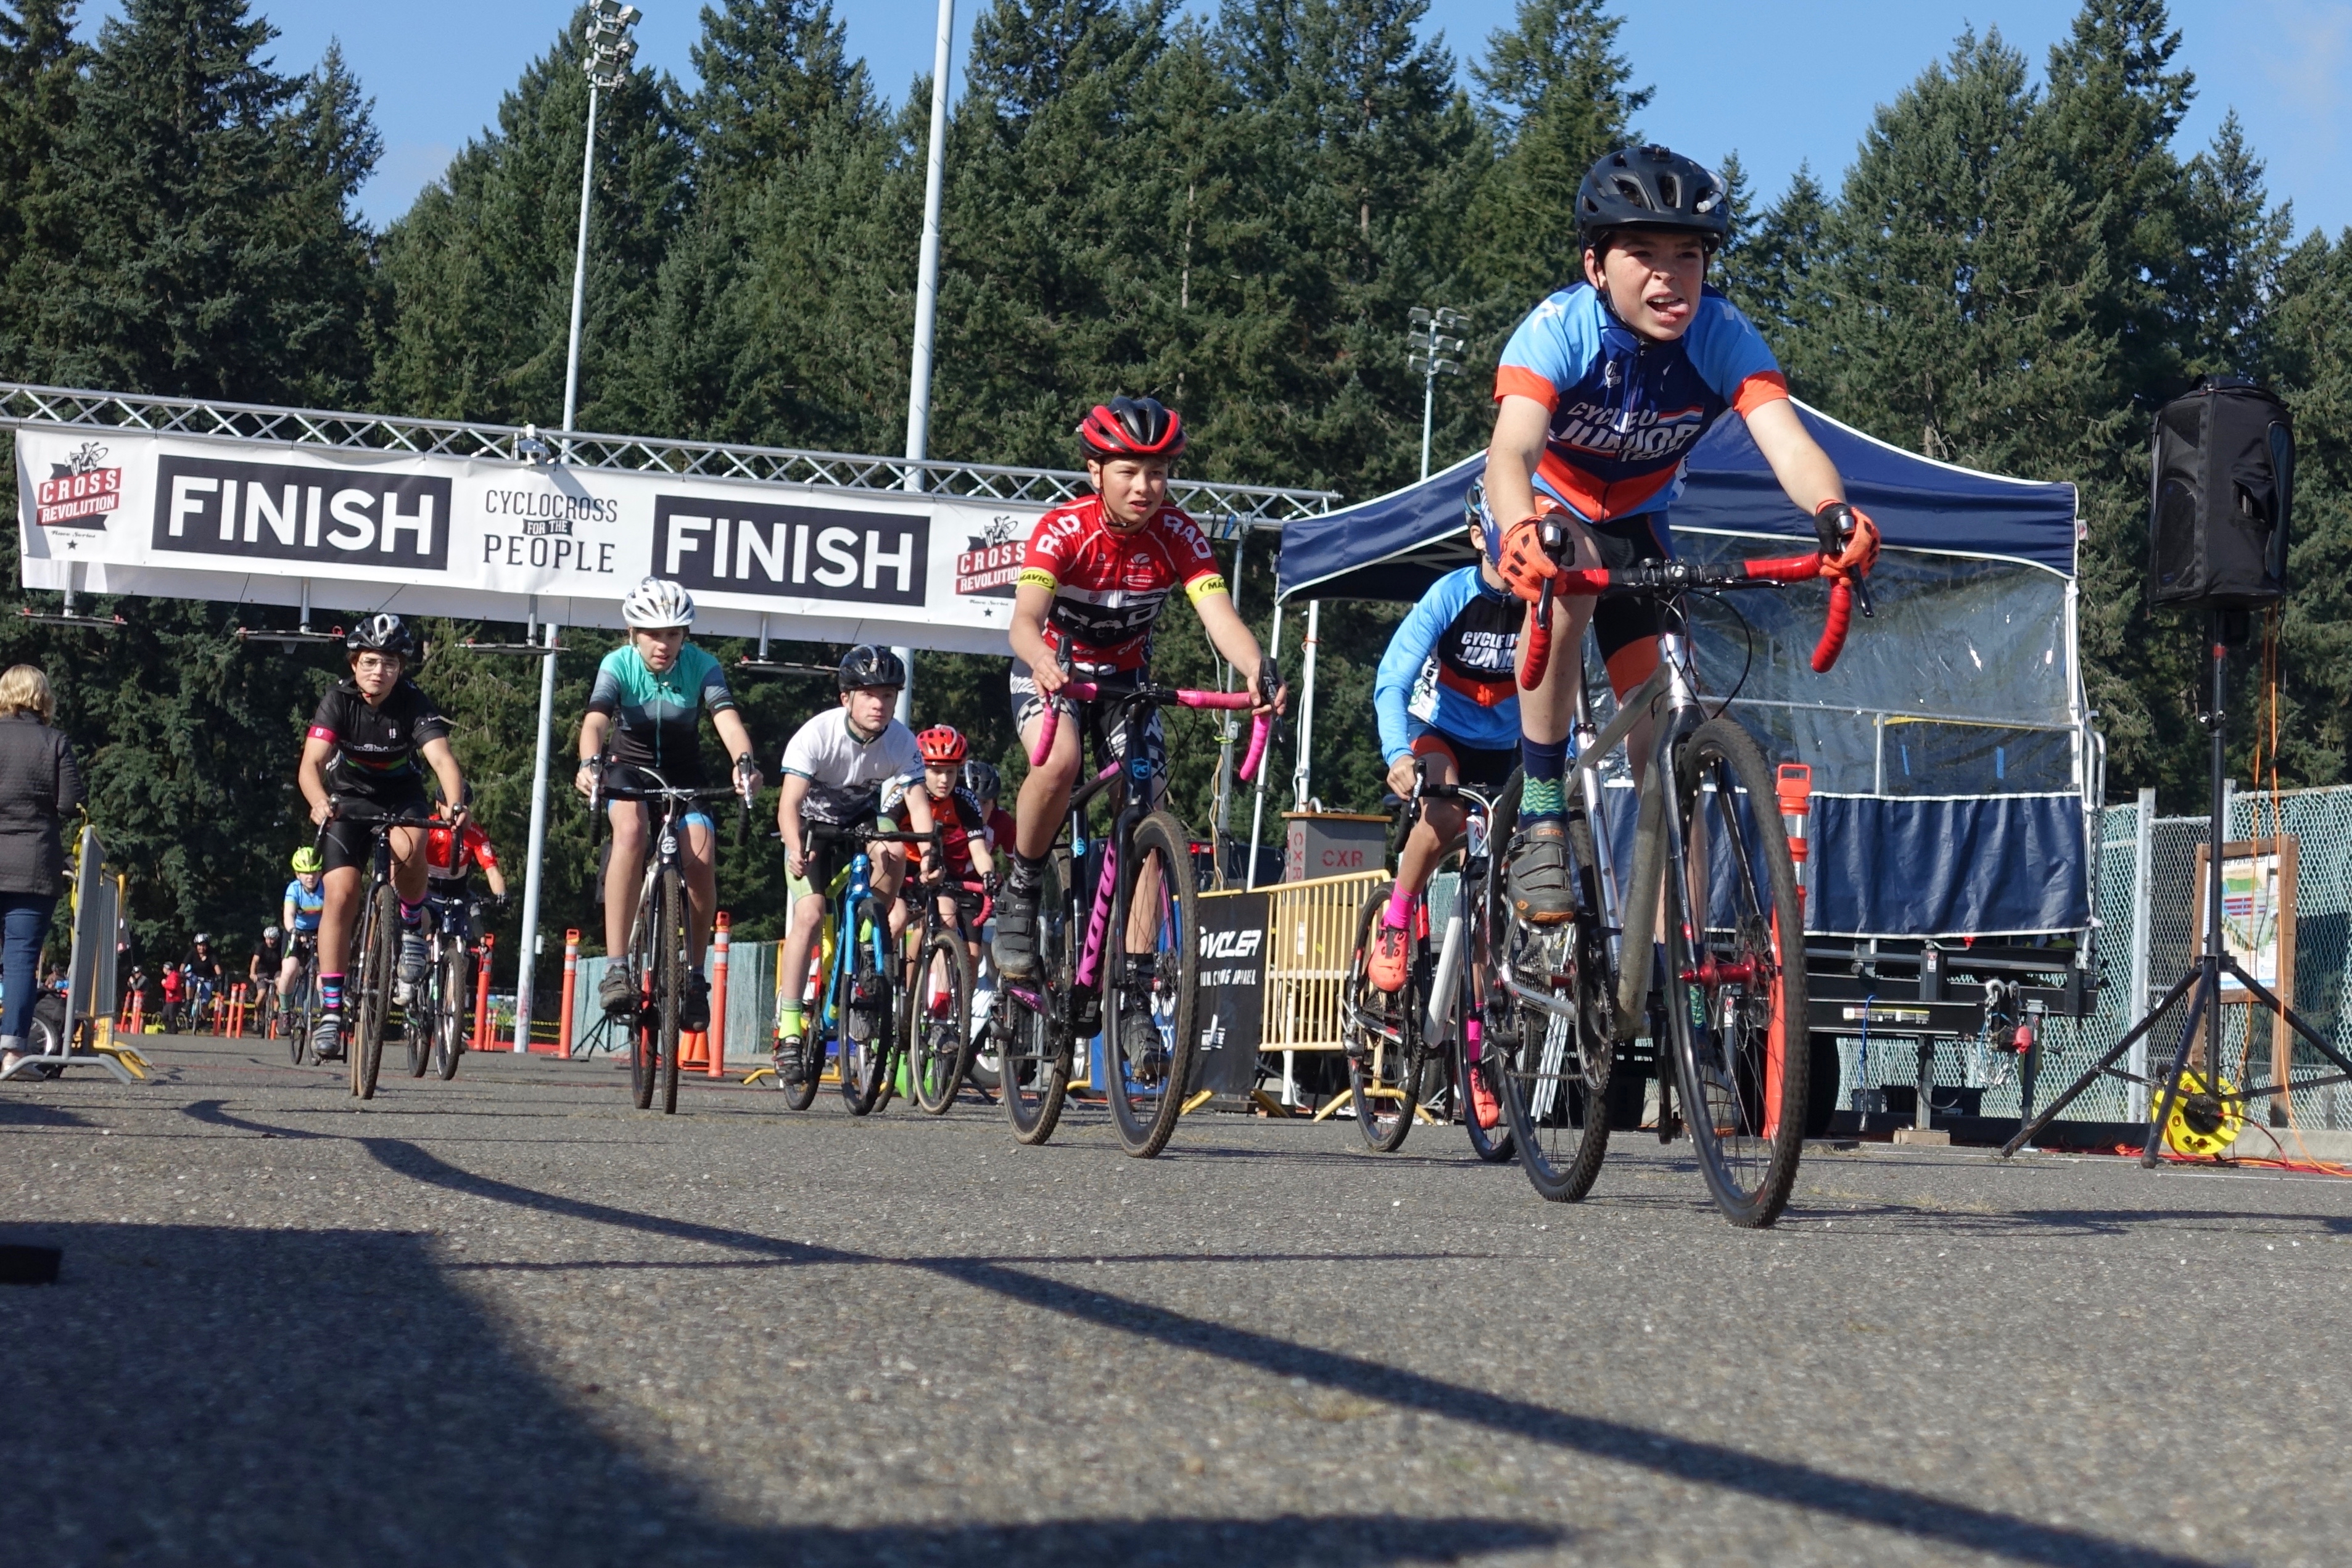 Kids hit the gas out of the start area.